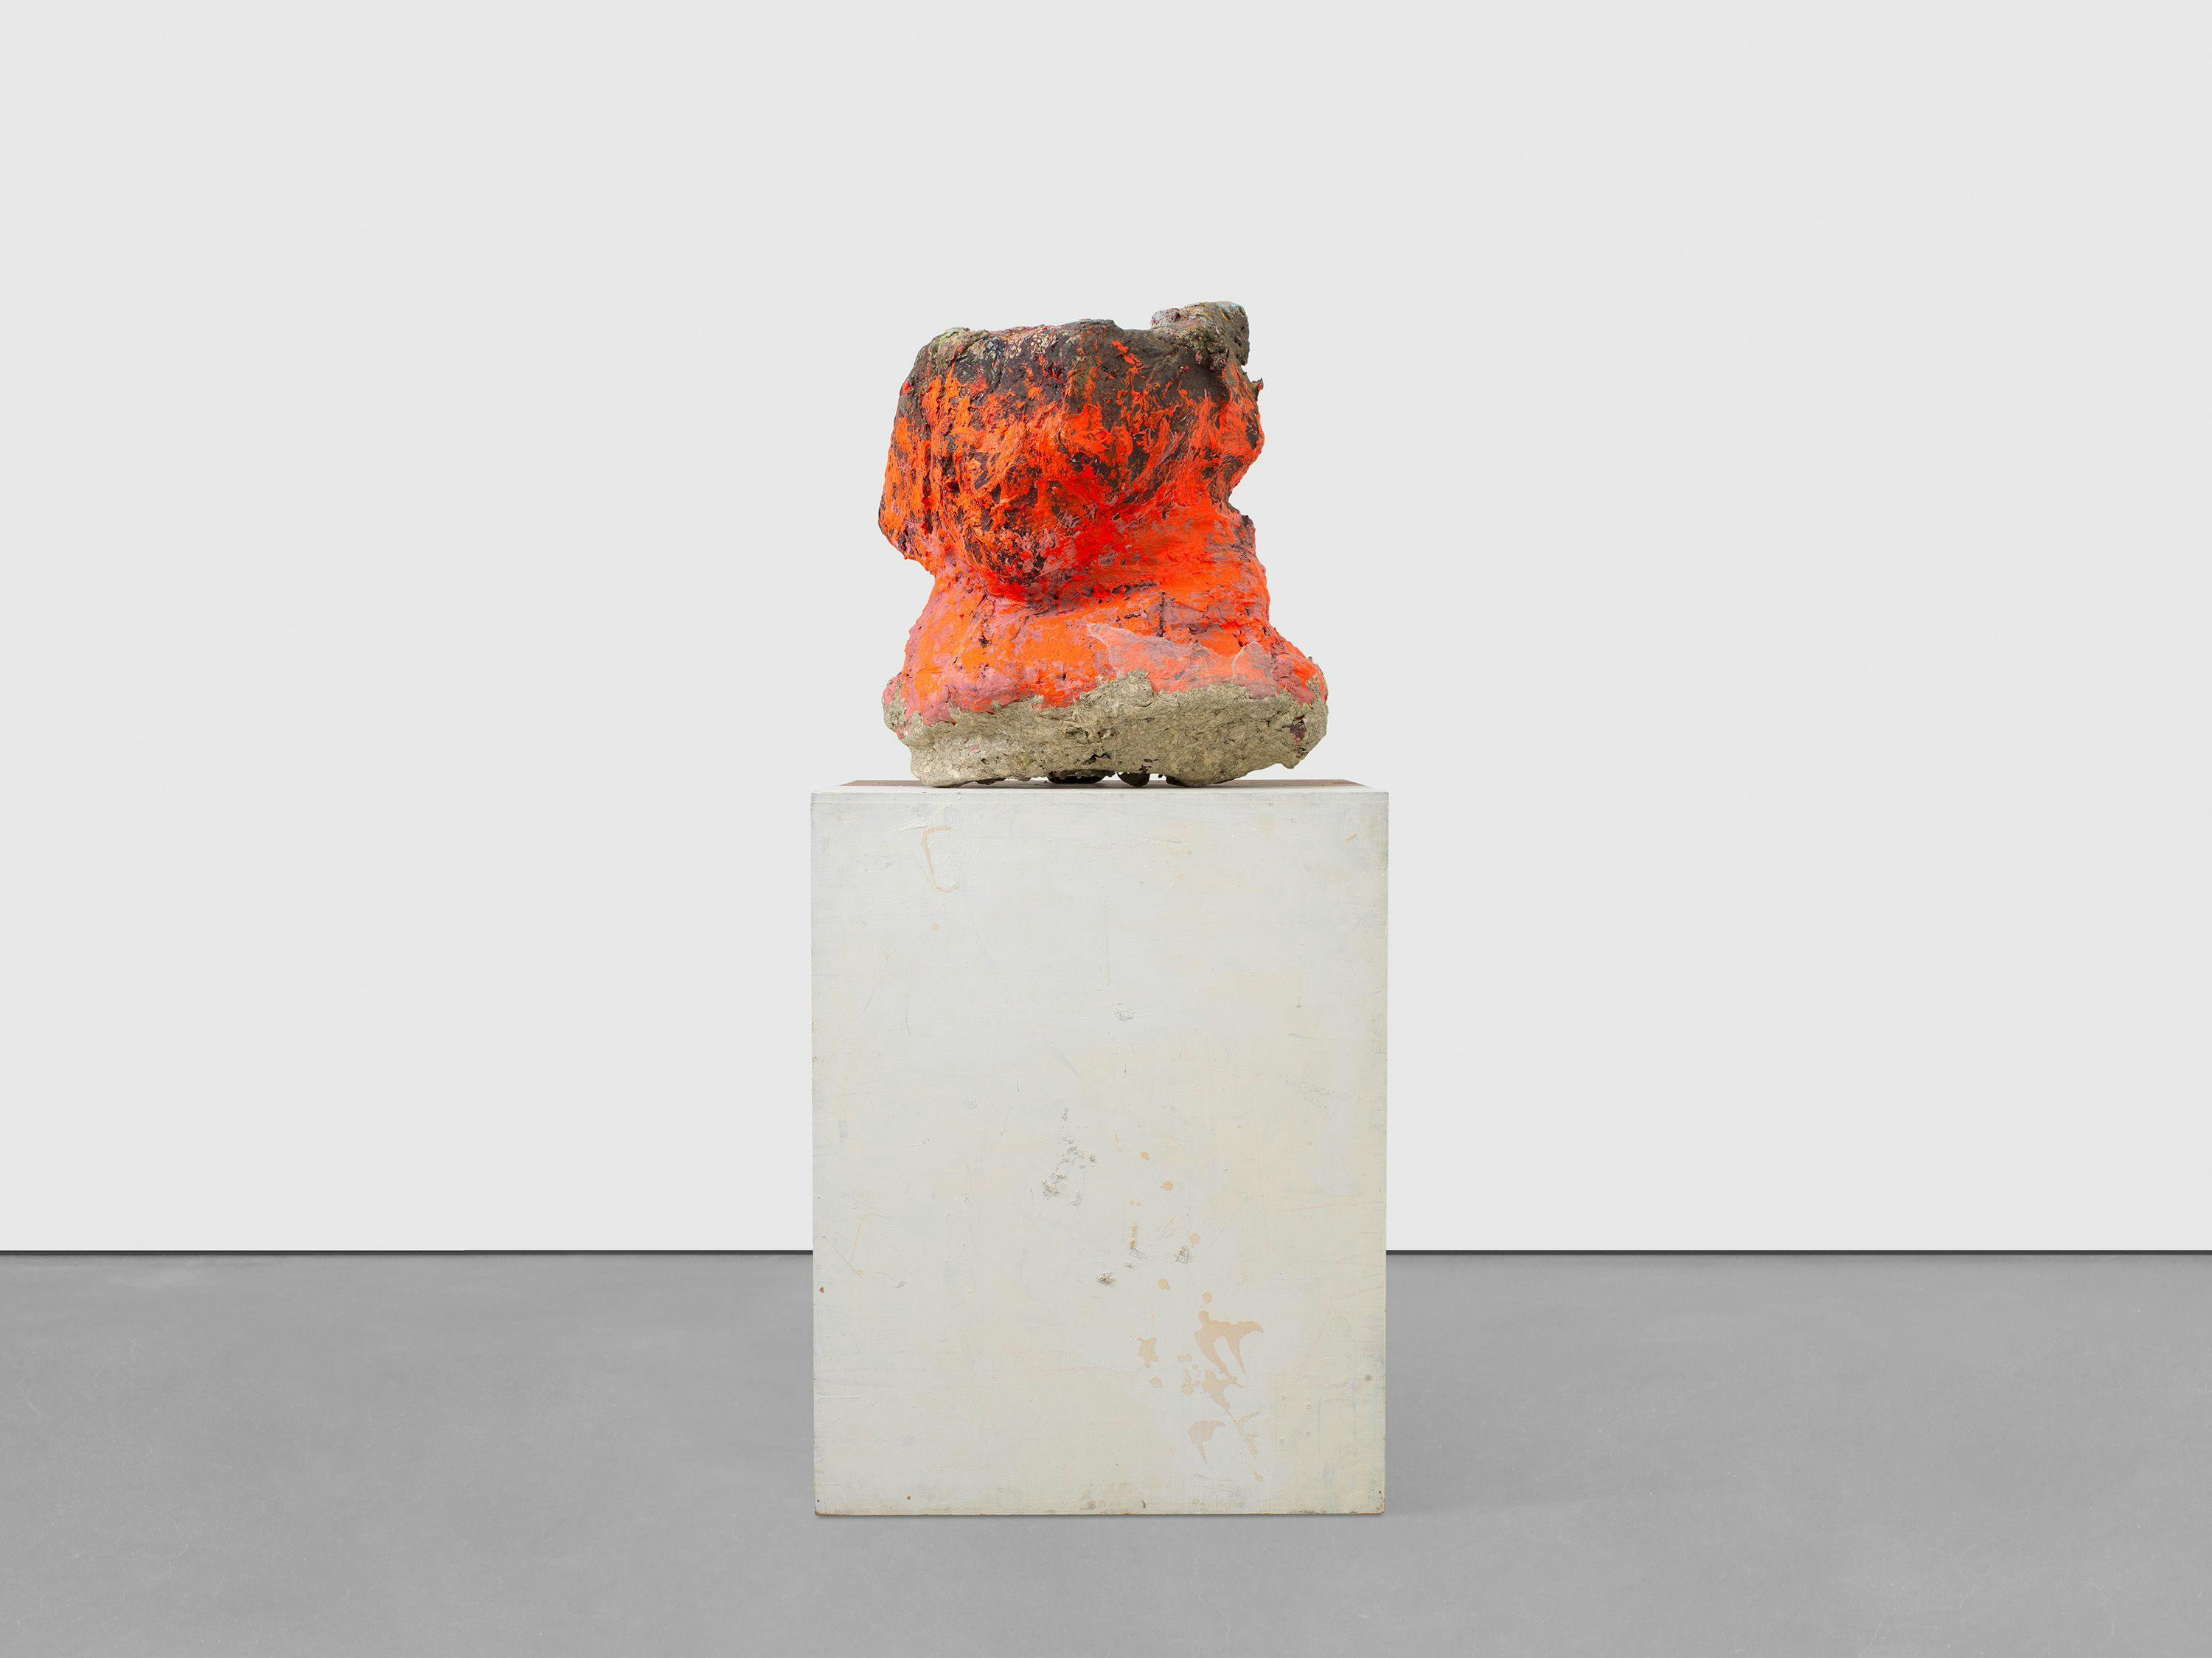 A sculpture by Franz West, titled Pleonasme, translated as Pleonasm, dated 1999.